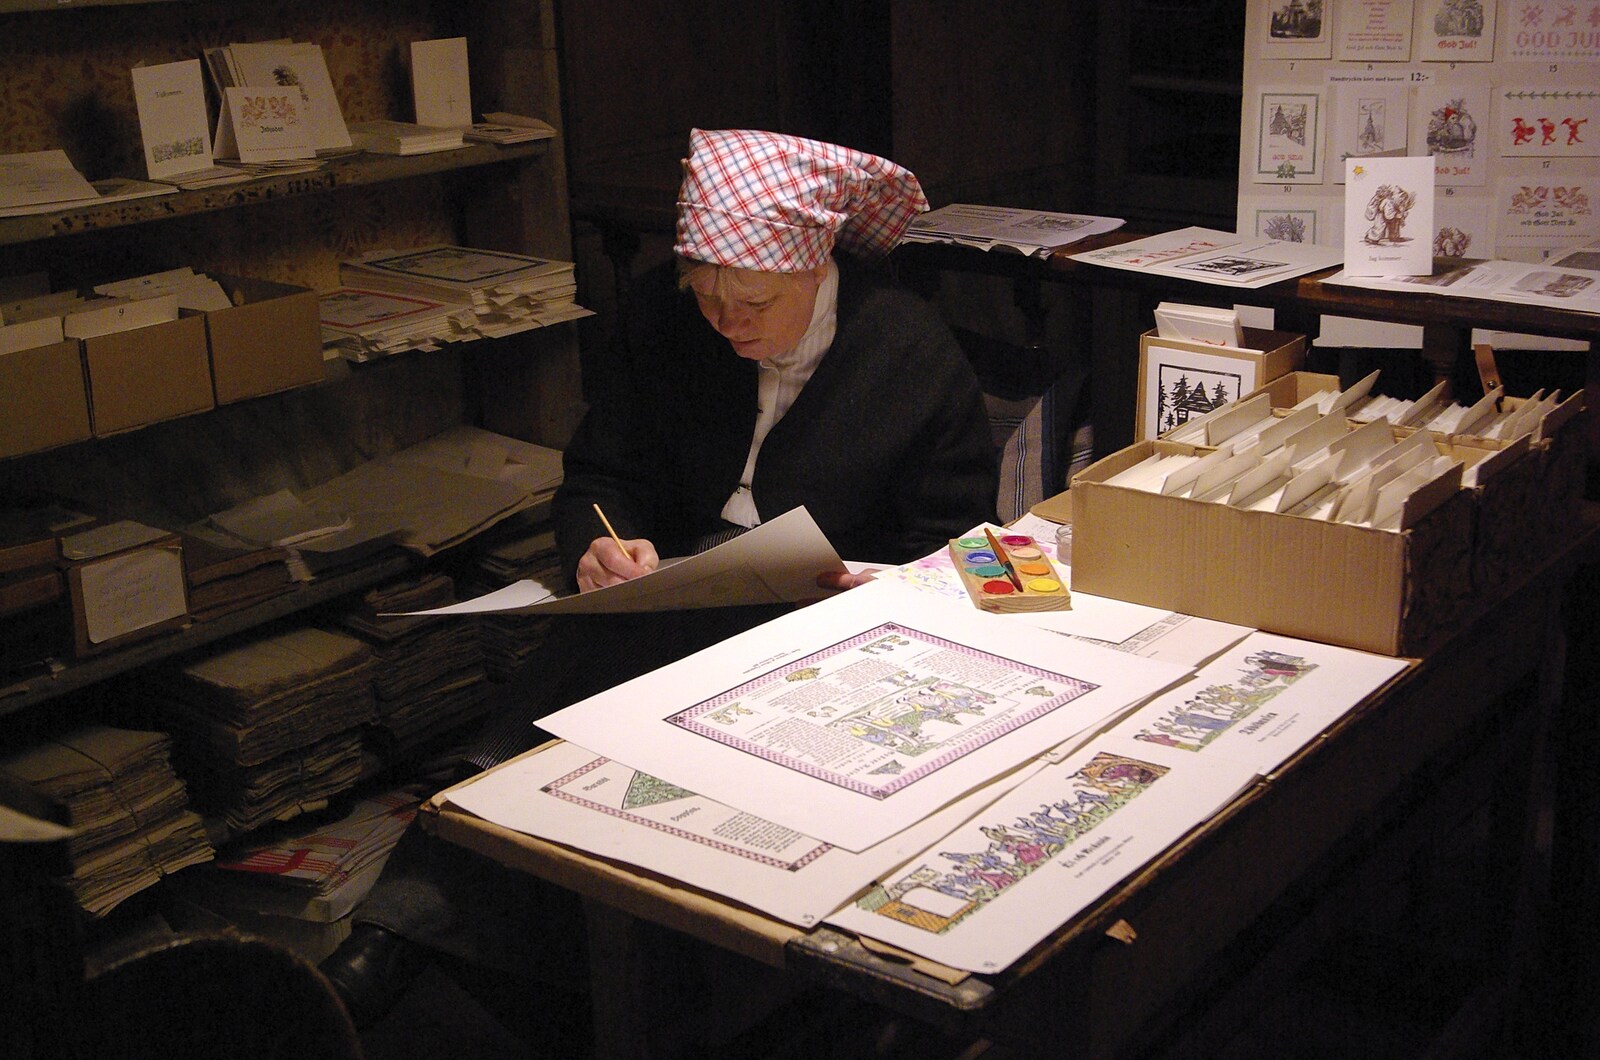 A woman hand-paints some printed illustrations from A Few Hours in Skansen, Stockholm, Sweden - 17th December 2007